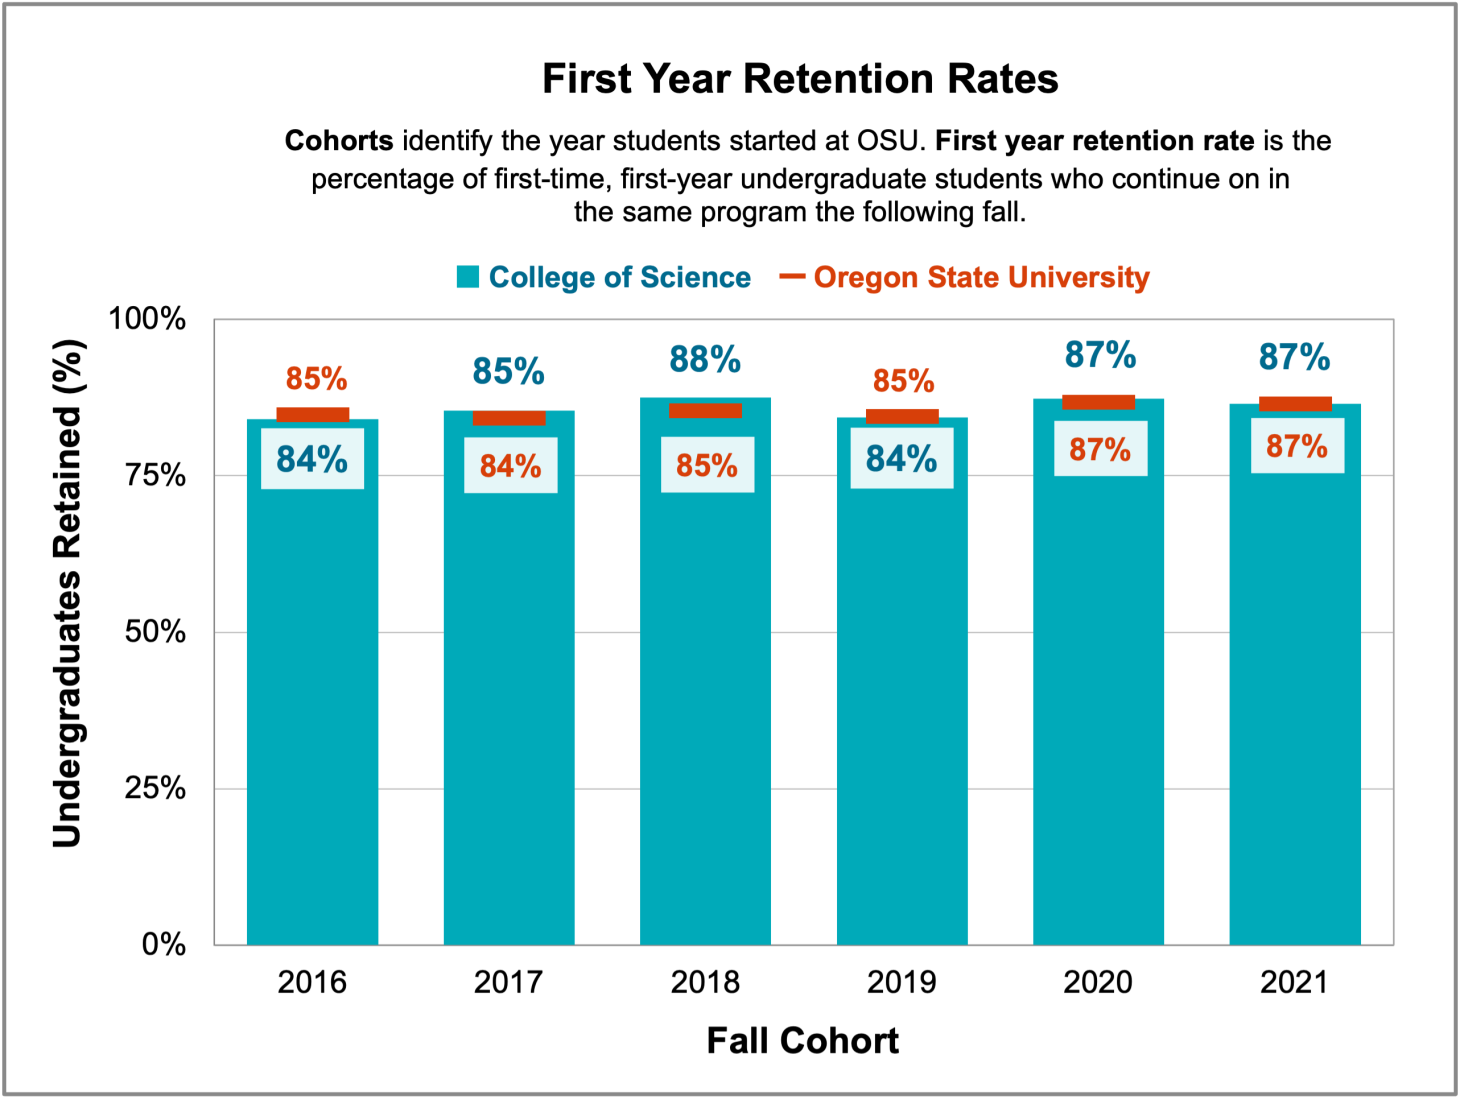 Graph showing the percent of first-year students from cohorts over the last six years who continued on in the College of Science or at Oregon State University. More details are available below, under Chart 3.2.1 First Year Retention Rates.